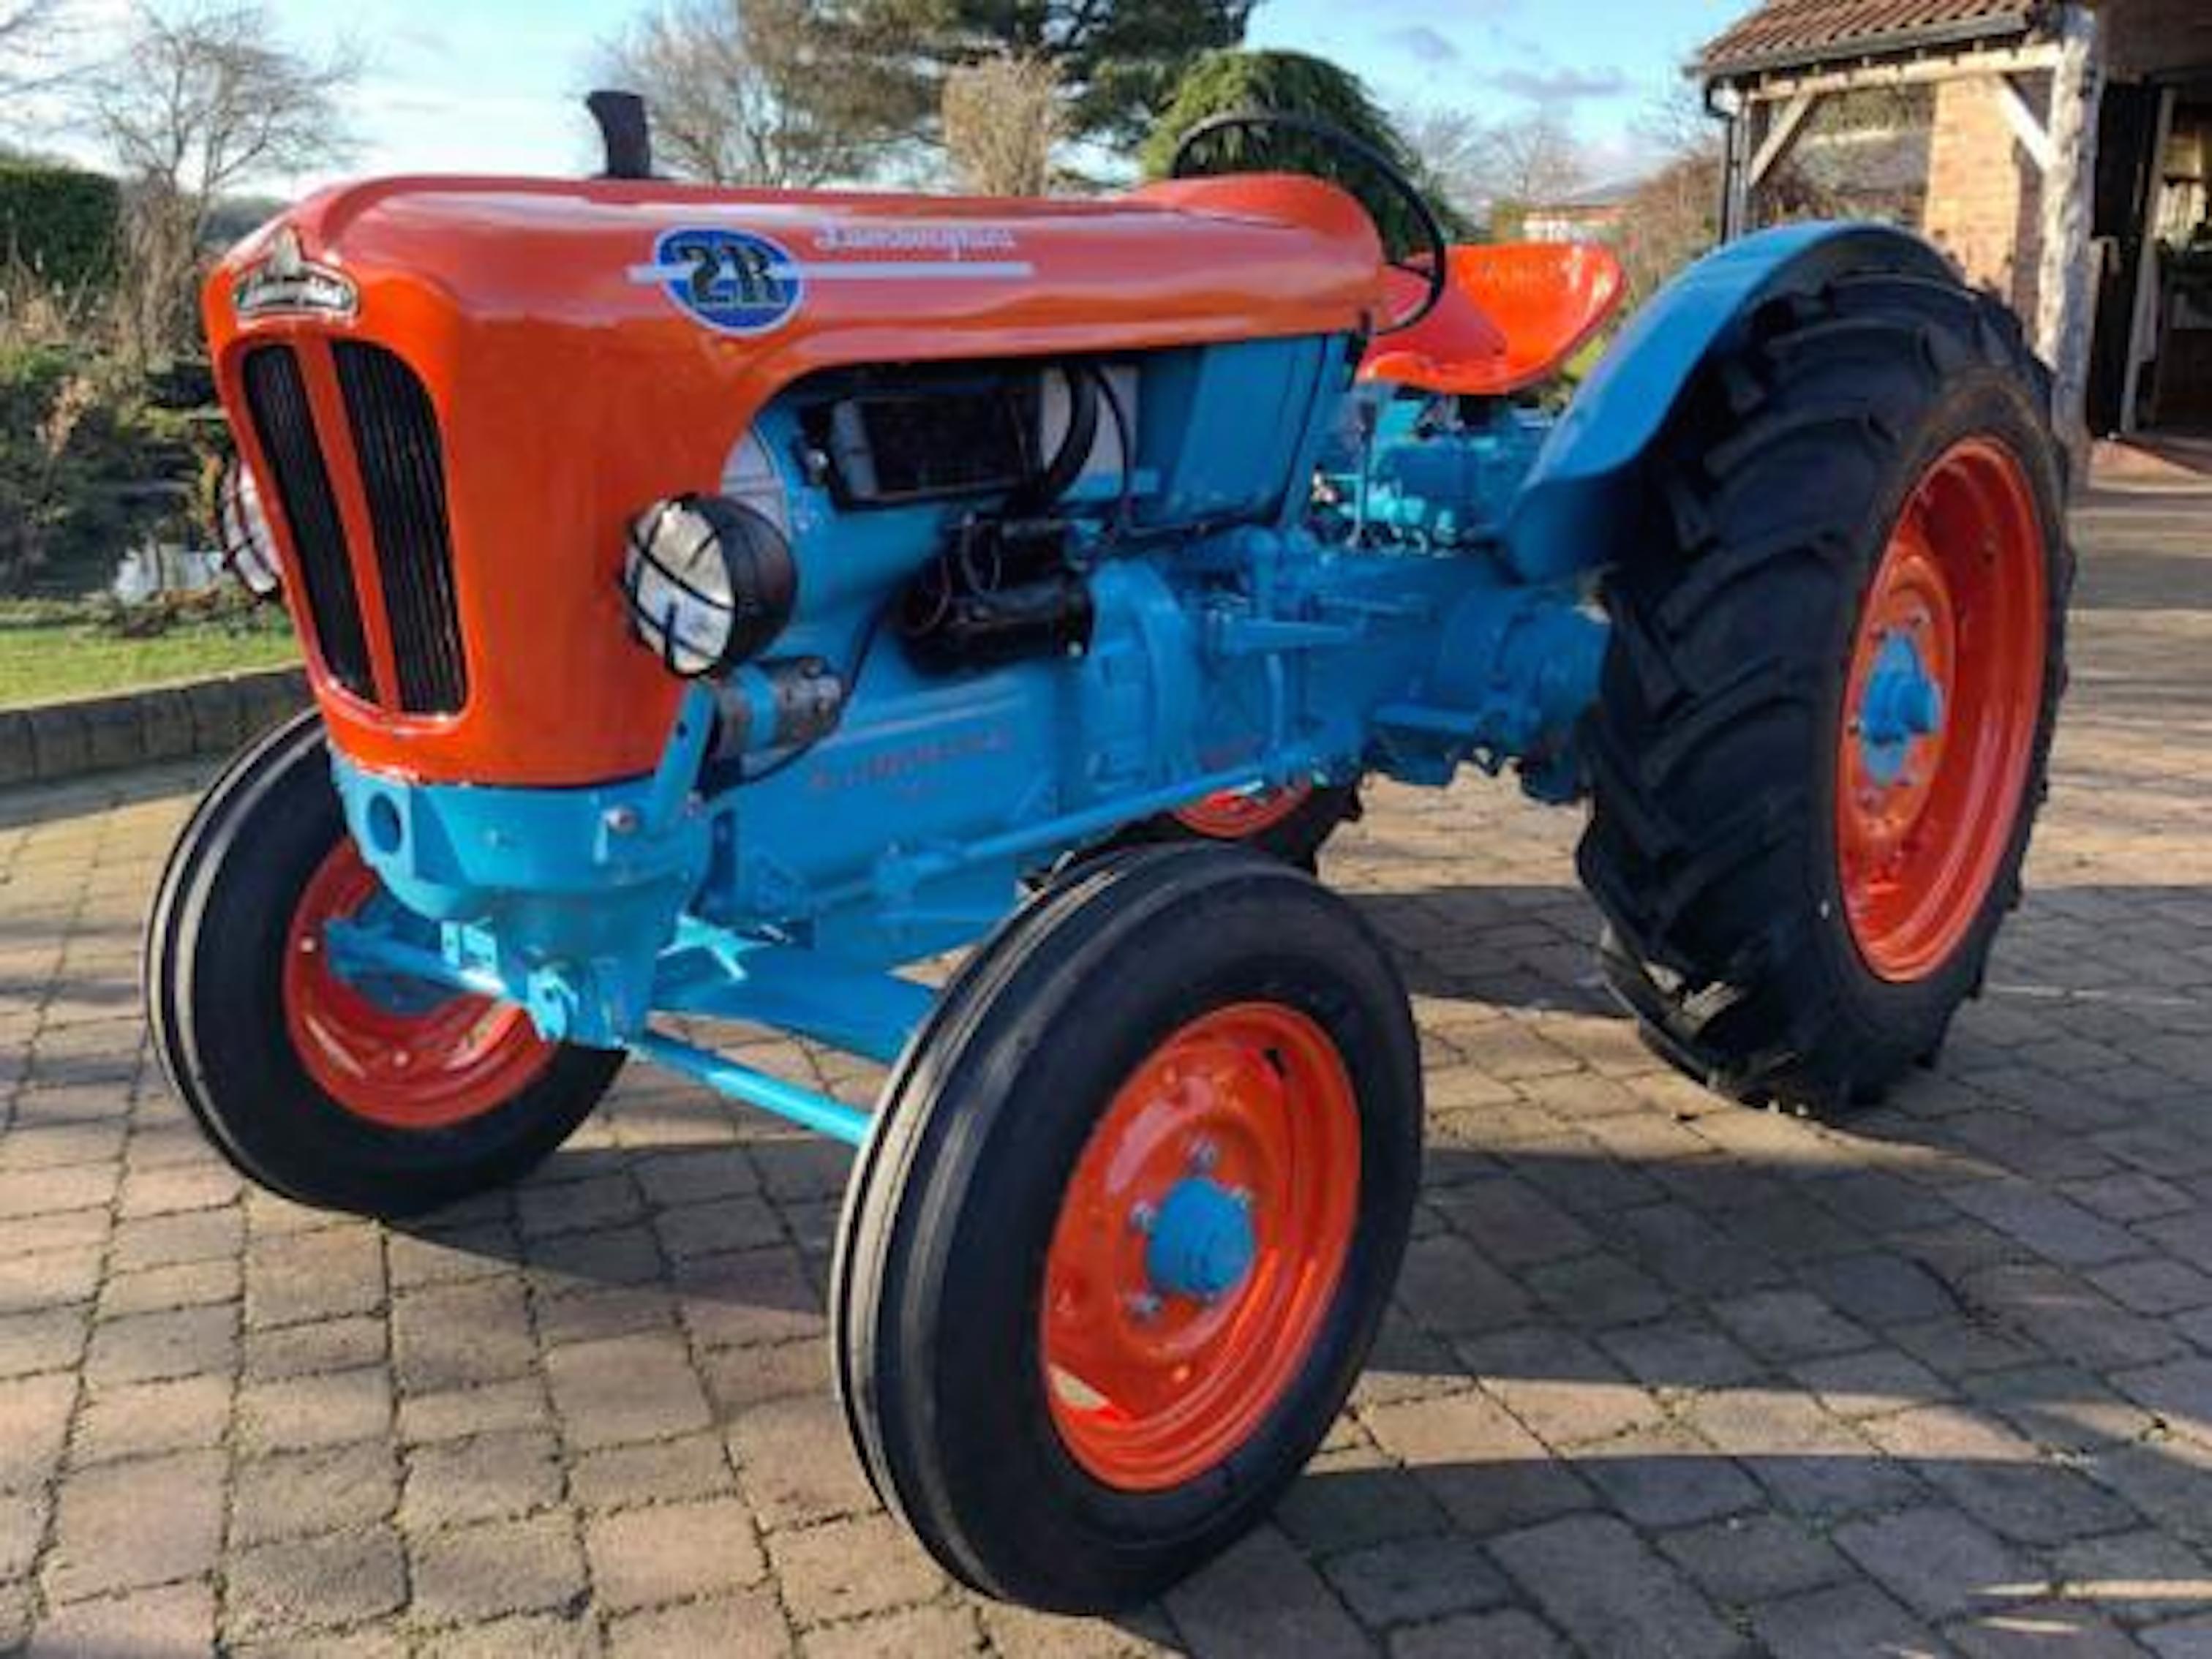 Complete your Lambo collection with a tractor and motorcycle